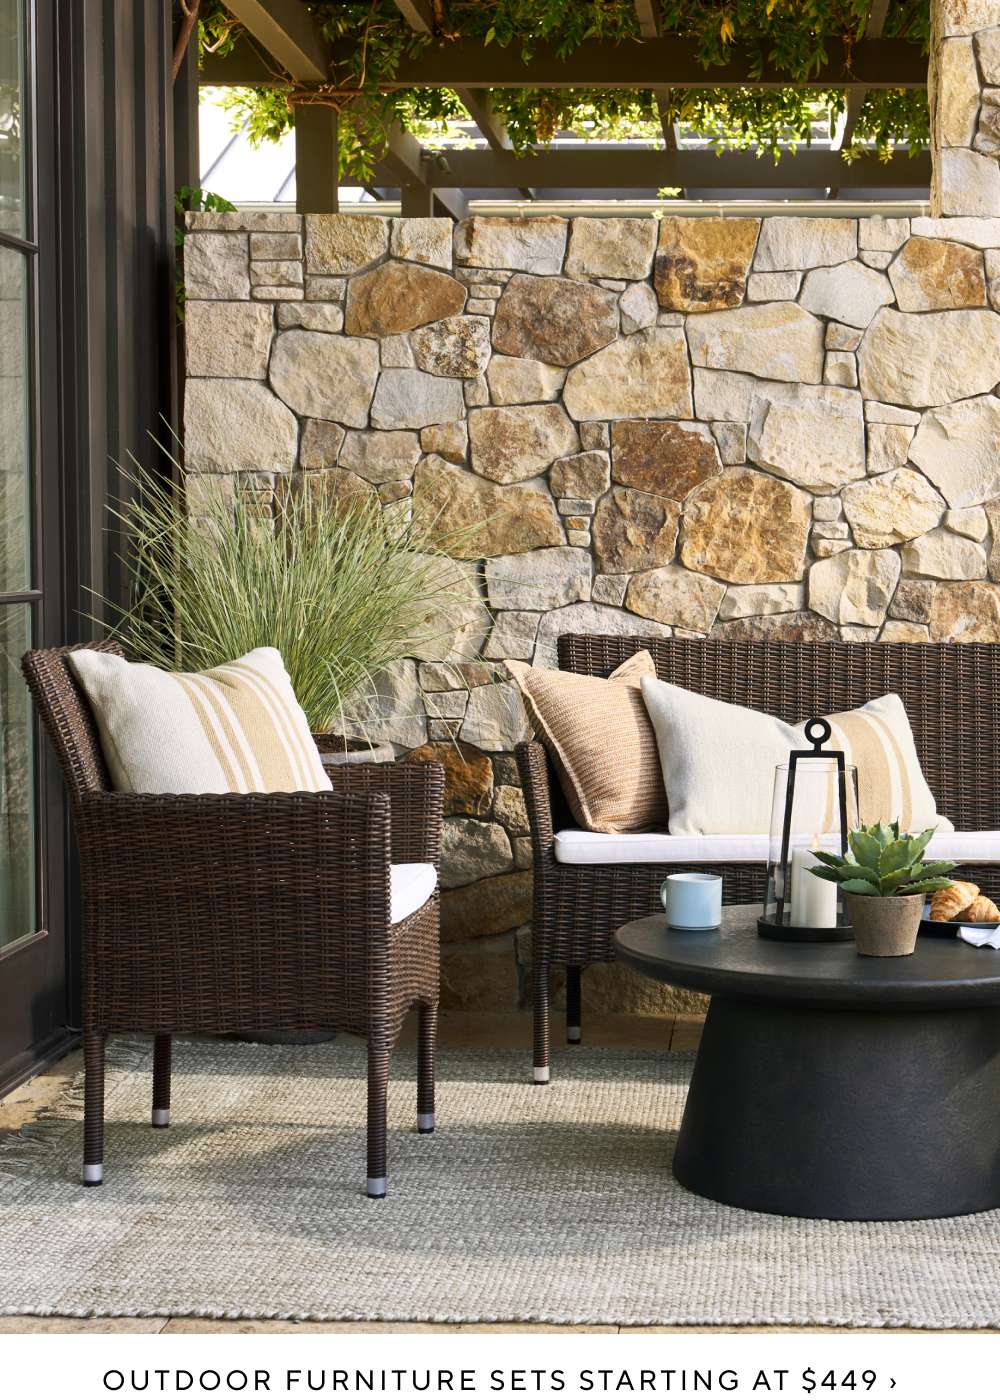 Outdoor Furniture Sets Starting at $999